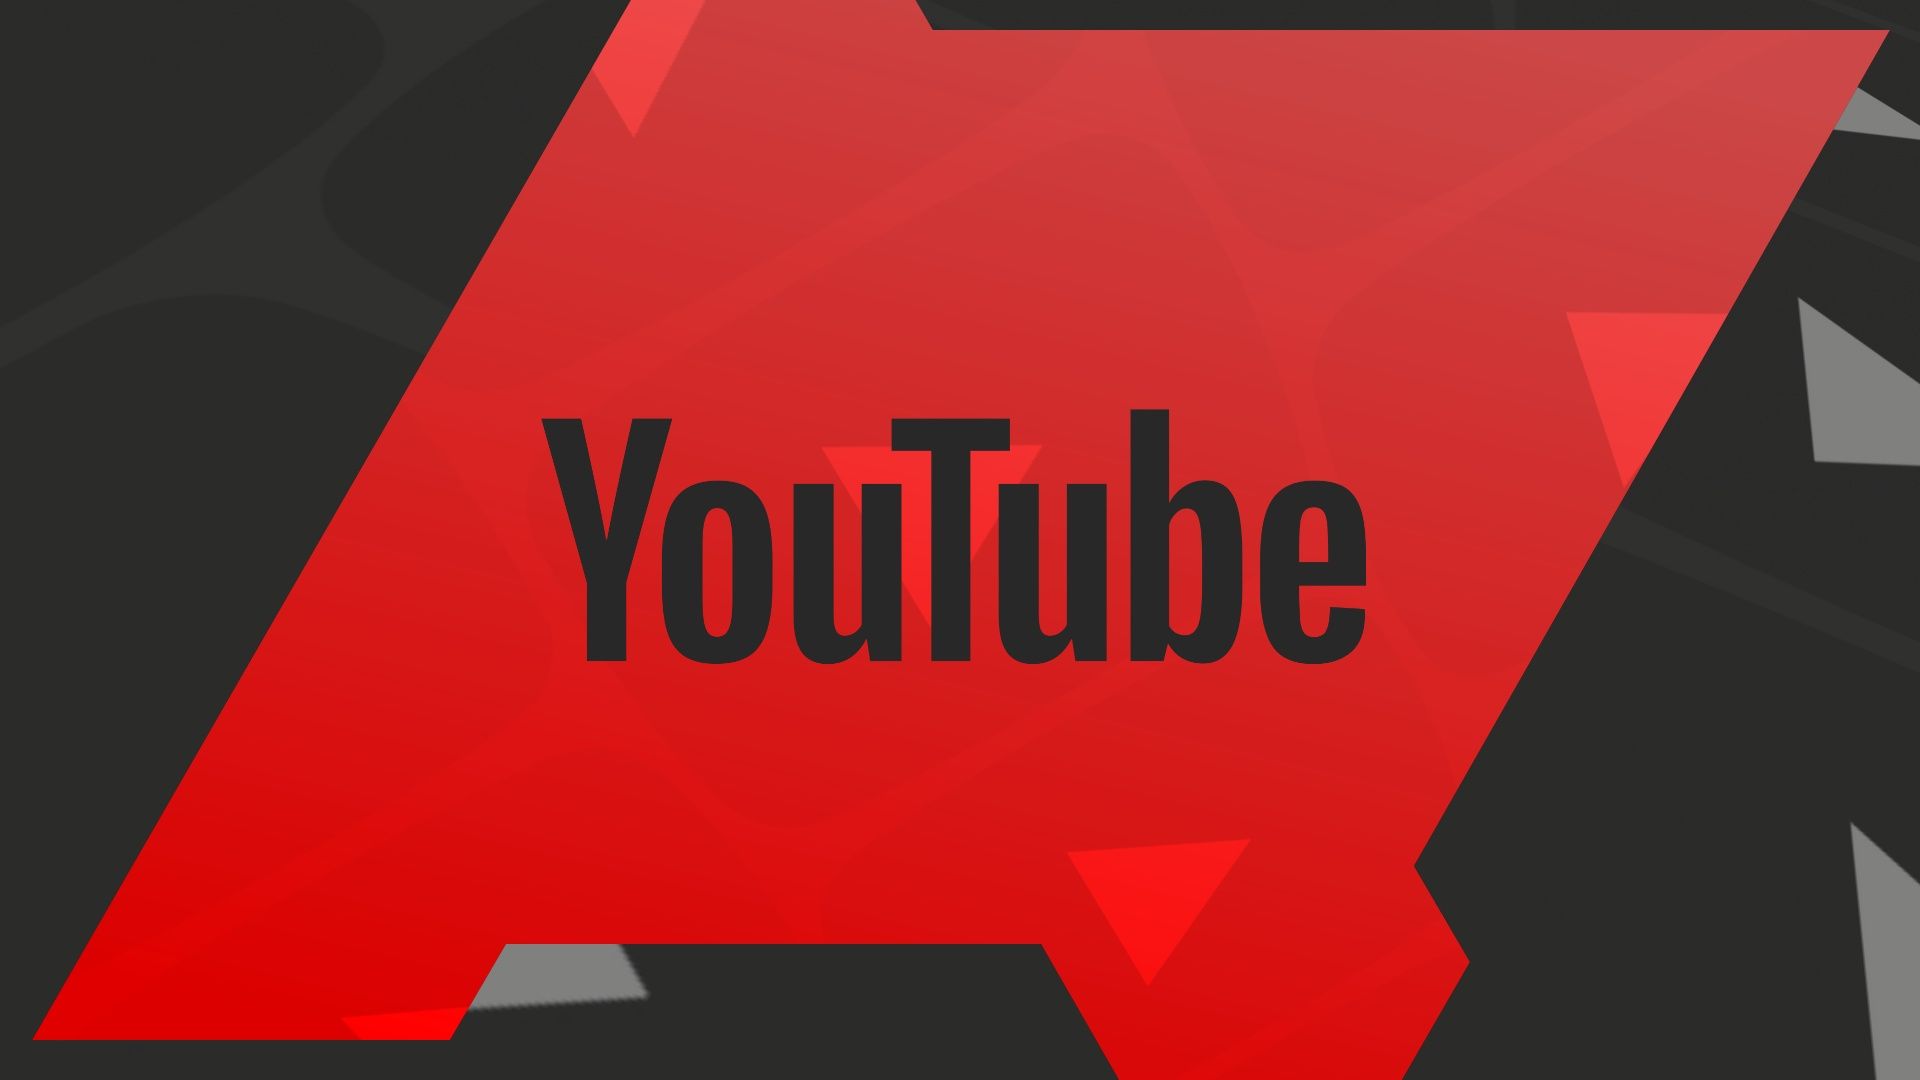 YouTube channel pages are getting a makeover on TVs